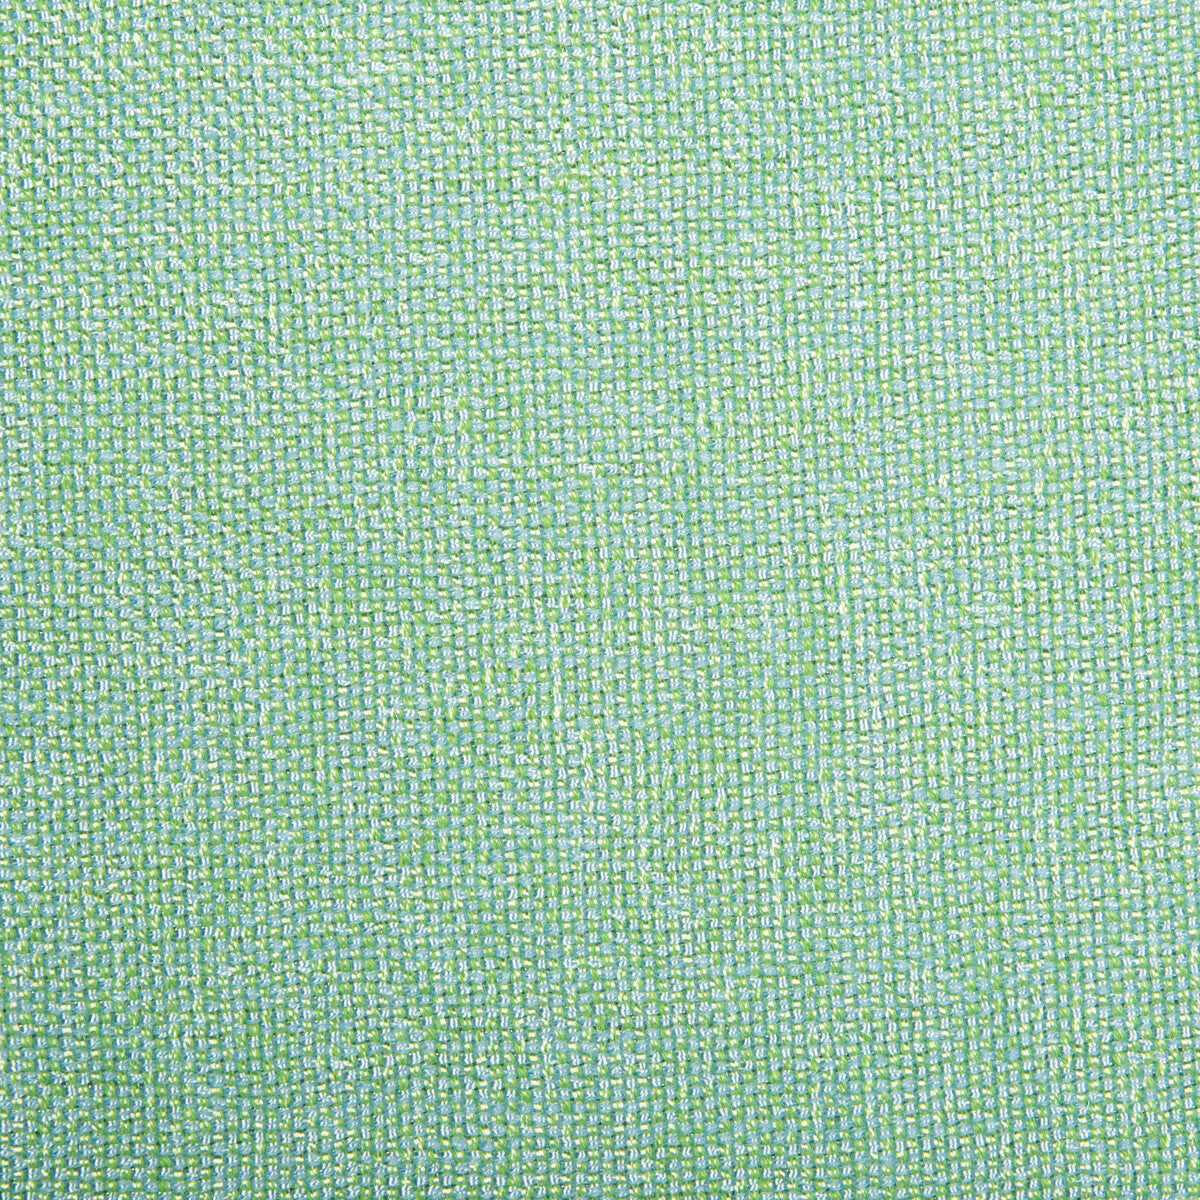 Kravet Contract fabric in 34926-1523 color - pattern 34926.1523.0 - by Kravet Contract